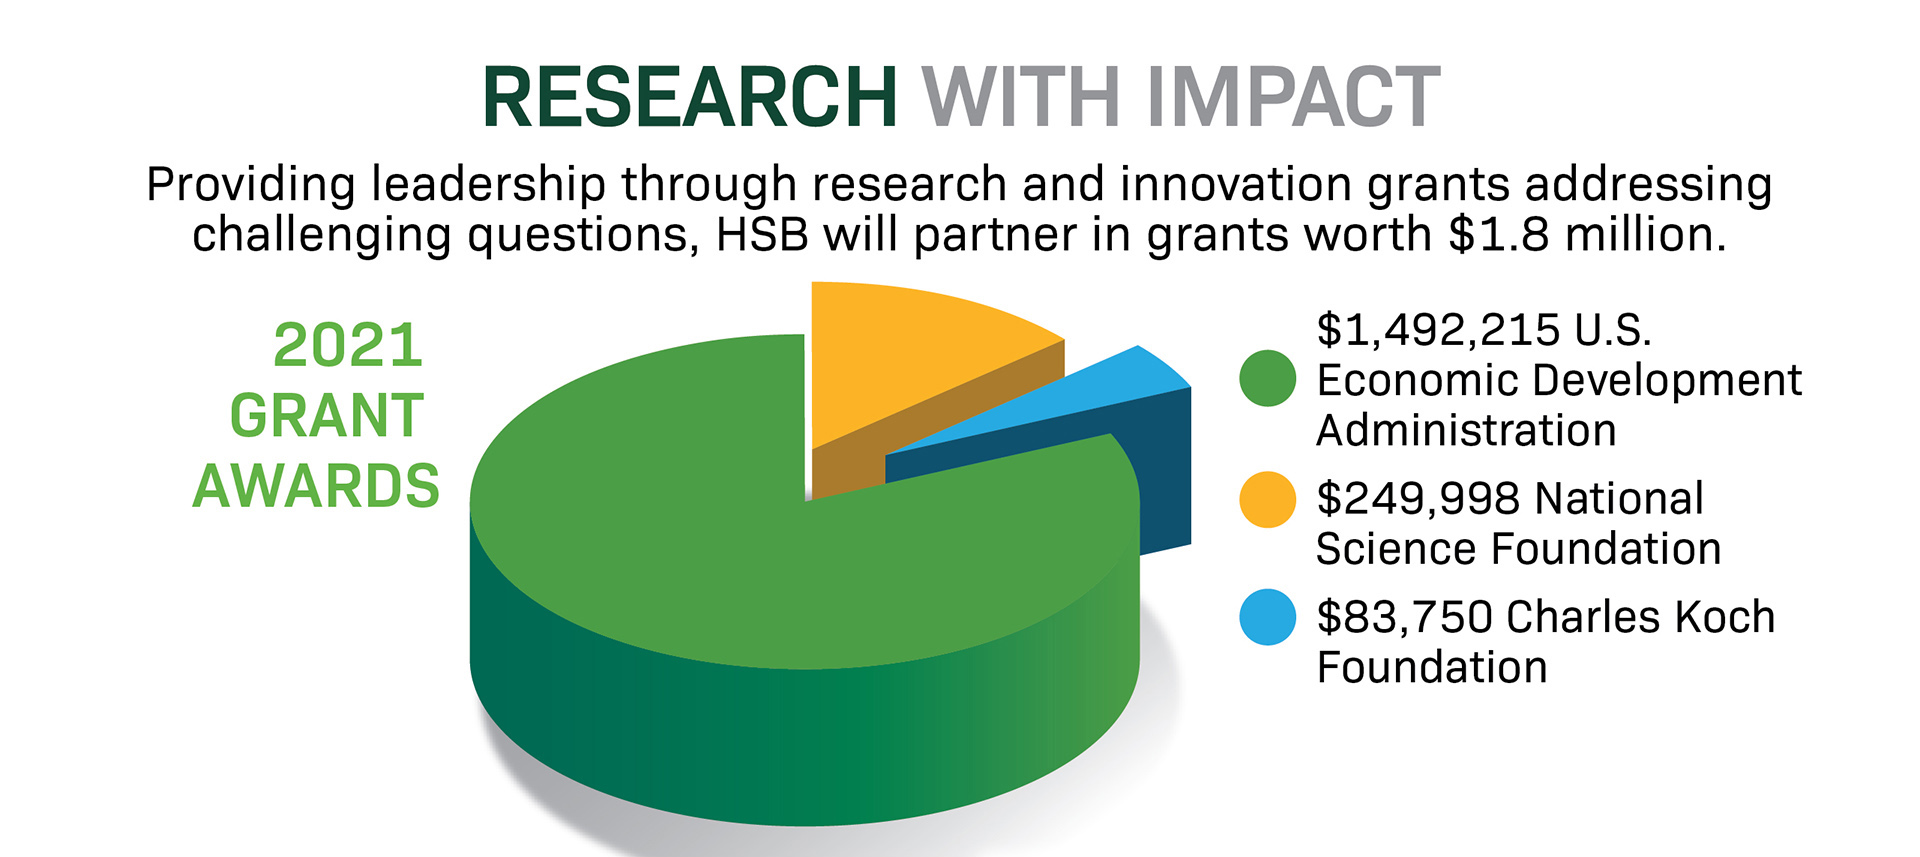 Infographic showing HSB grant awards for 2021